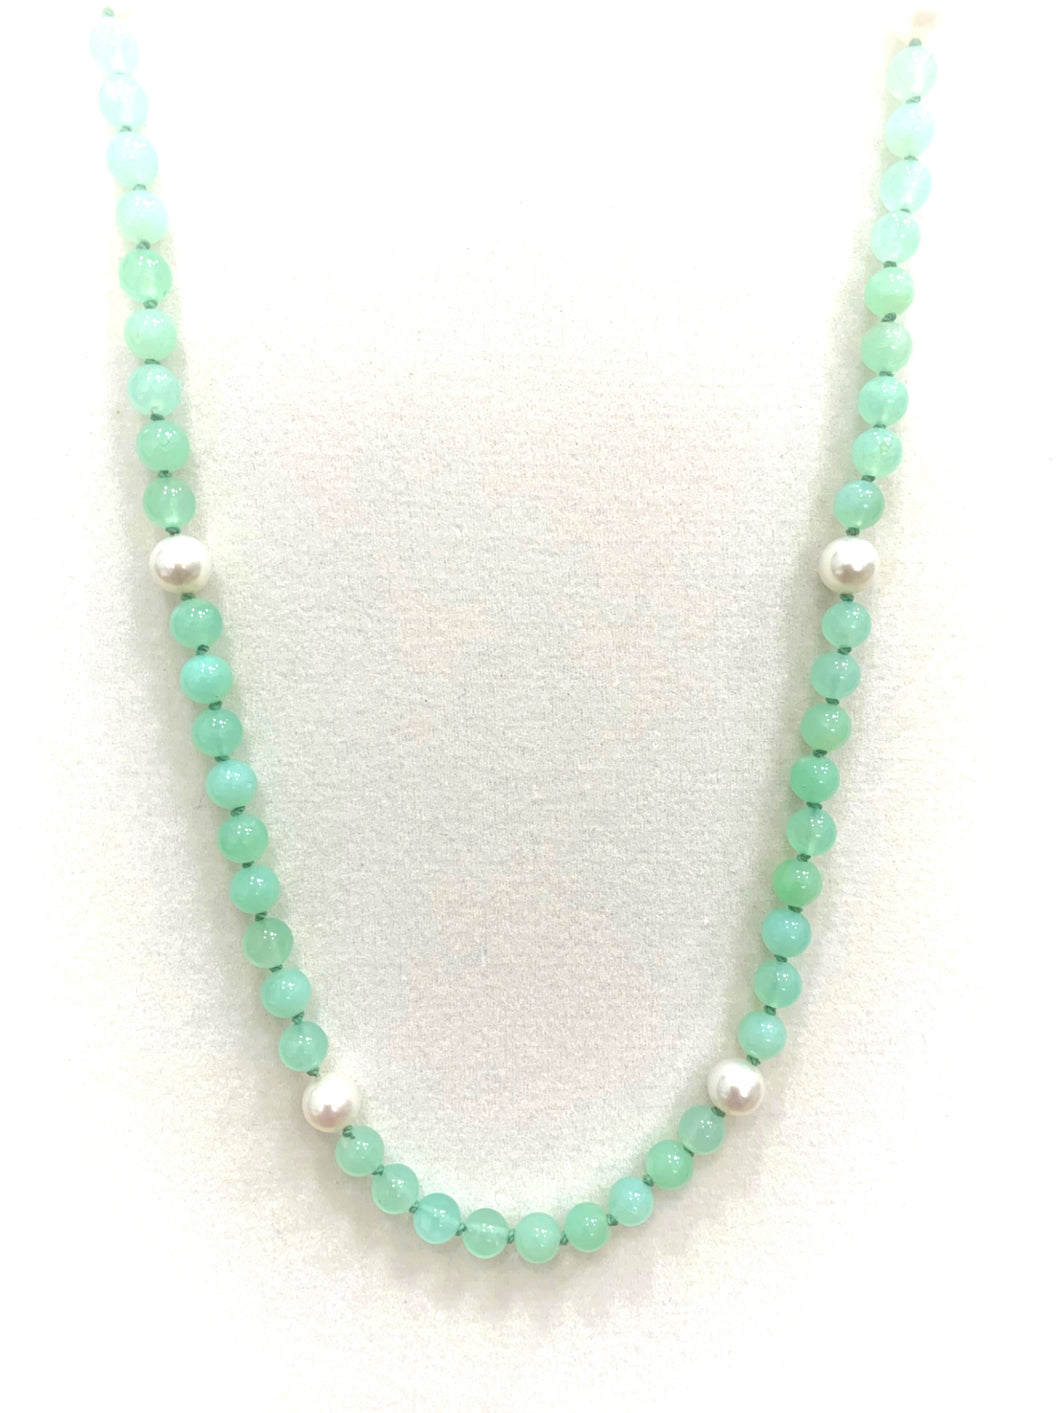 Handmade Chrsoprase and Pearl Bead Necklace